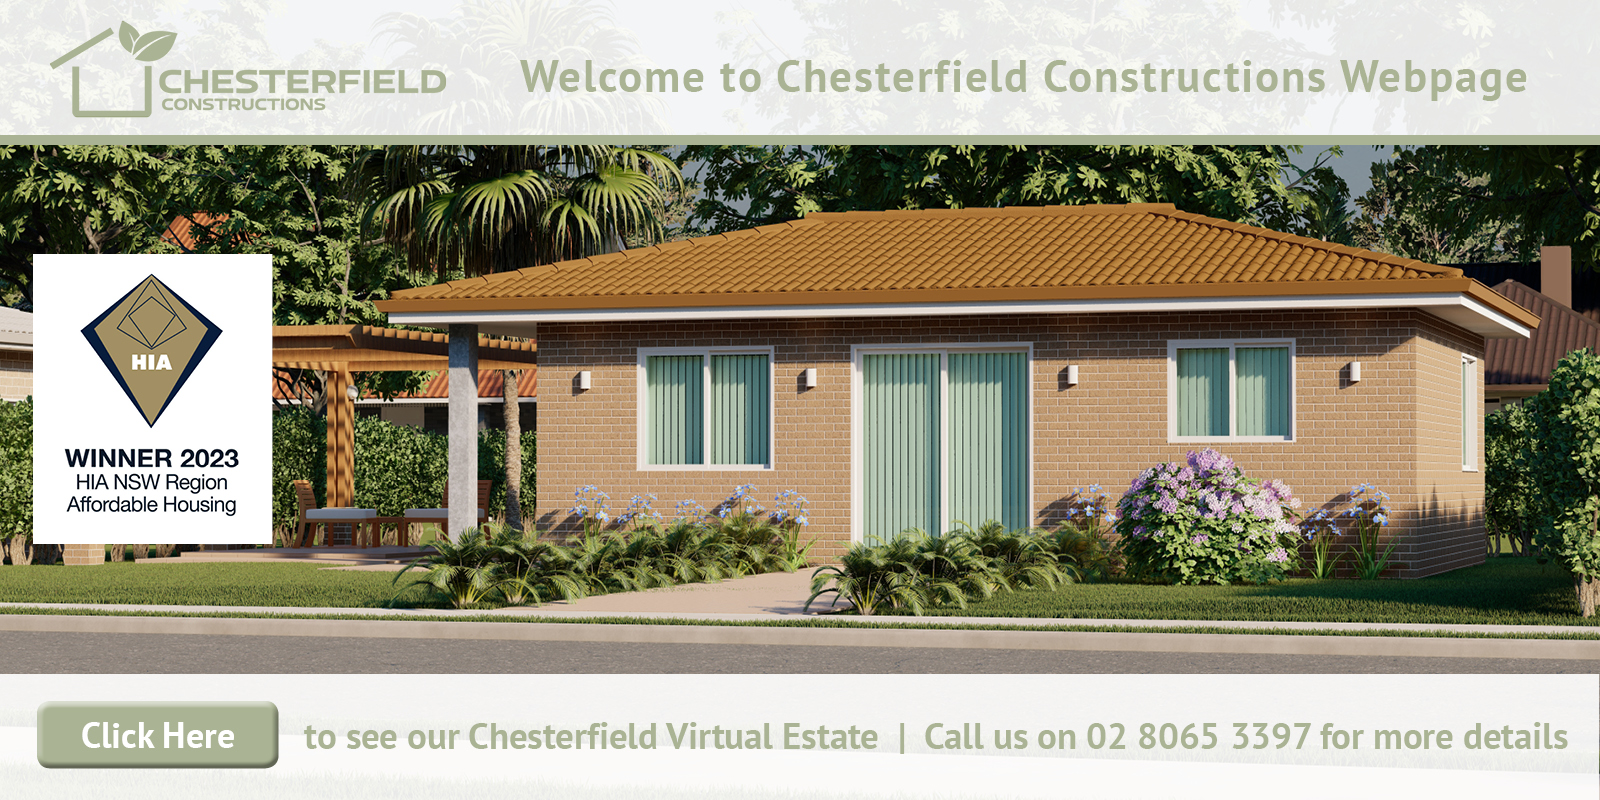 Chesterfield Constructions